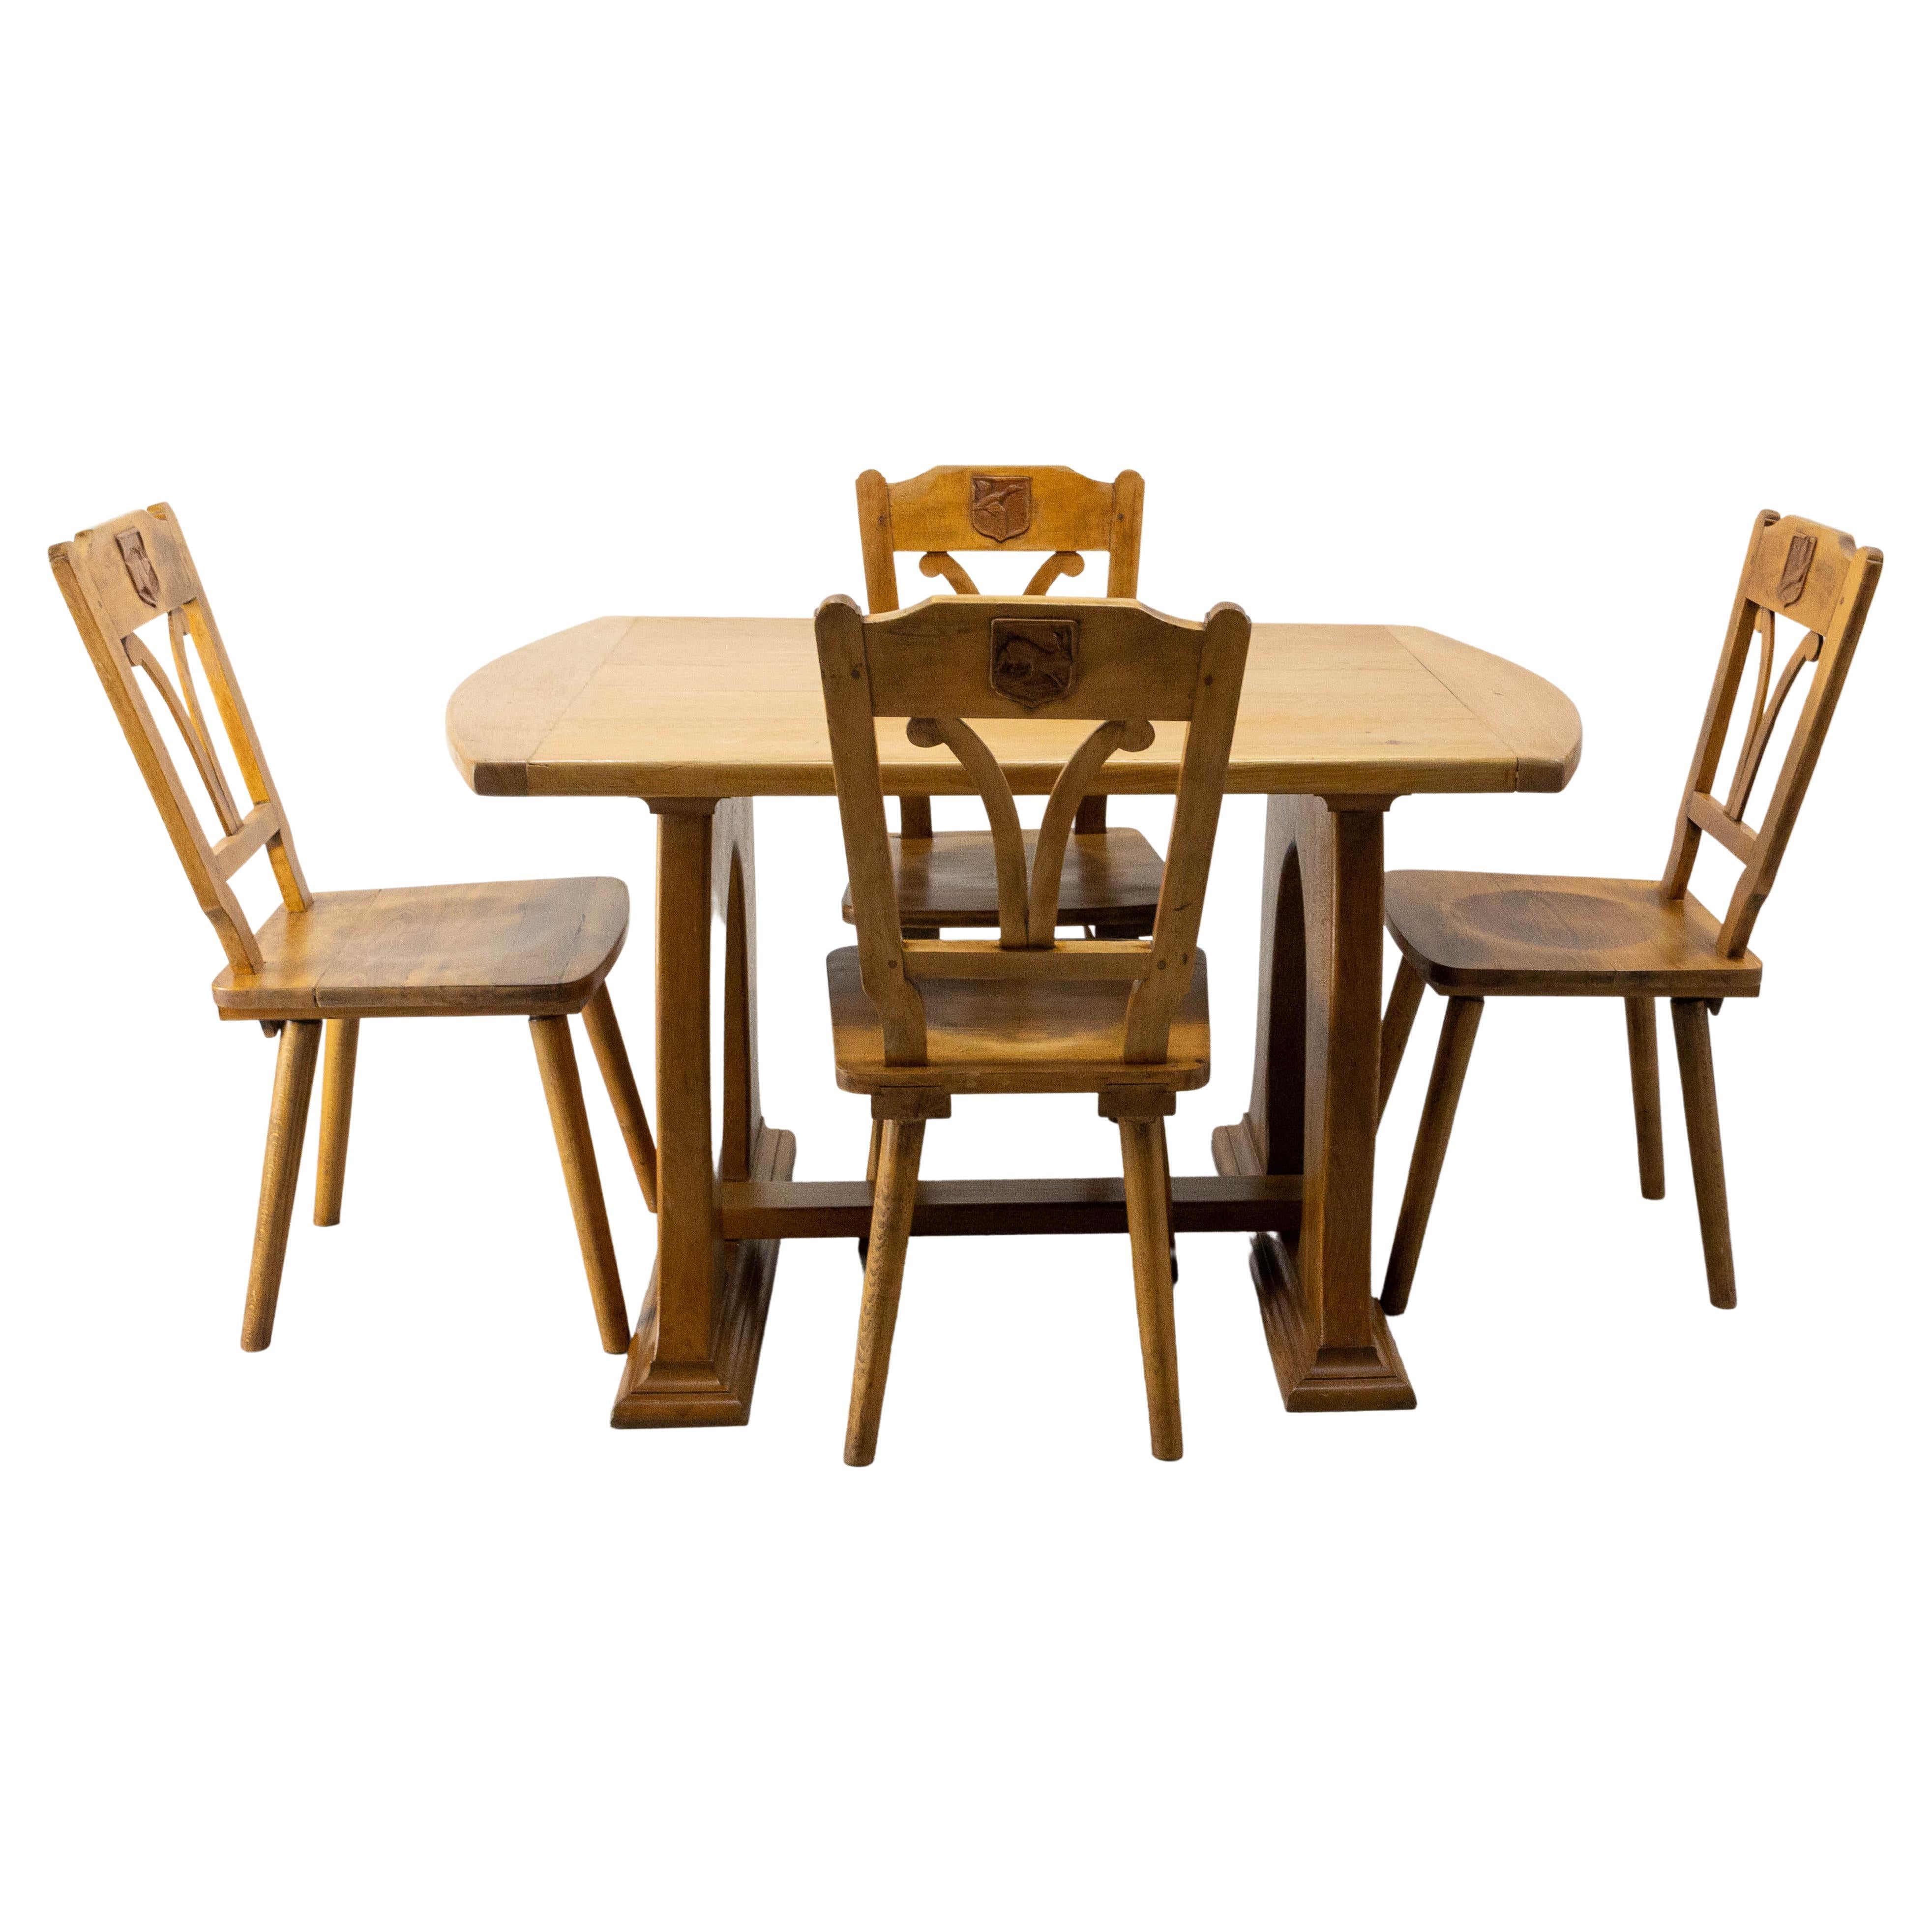 French set of a oak table and its four chairs, circa 1960.
The shape of the chairs and table are inspired by the lines of art nouveau. On the back of each chair, integrated into a frame in the form of a blazon, are two sculptures (one at the front